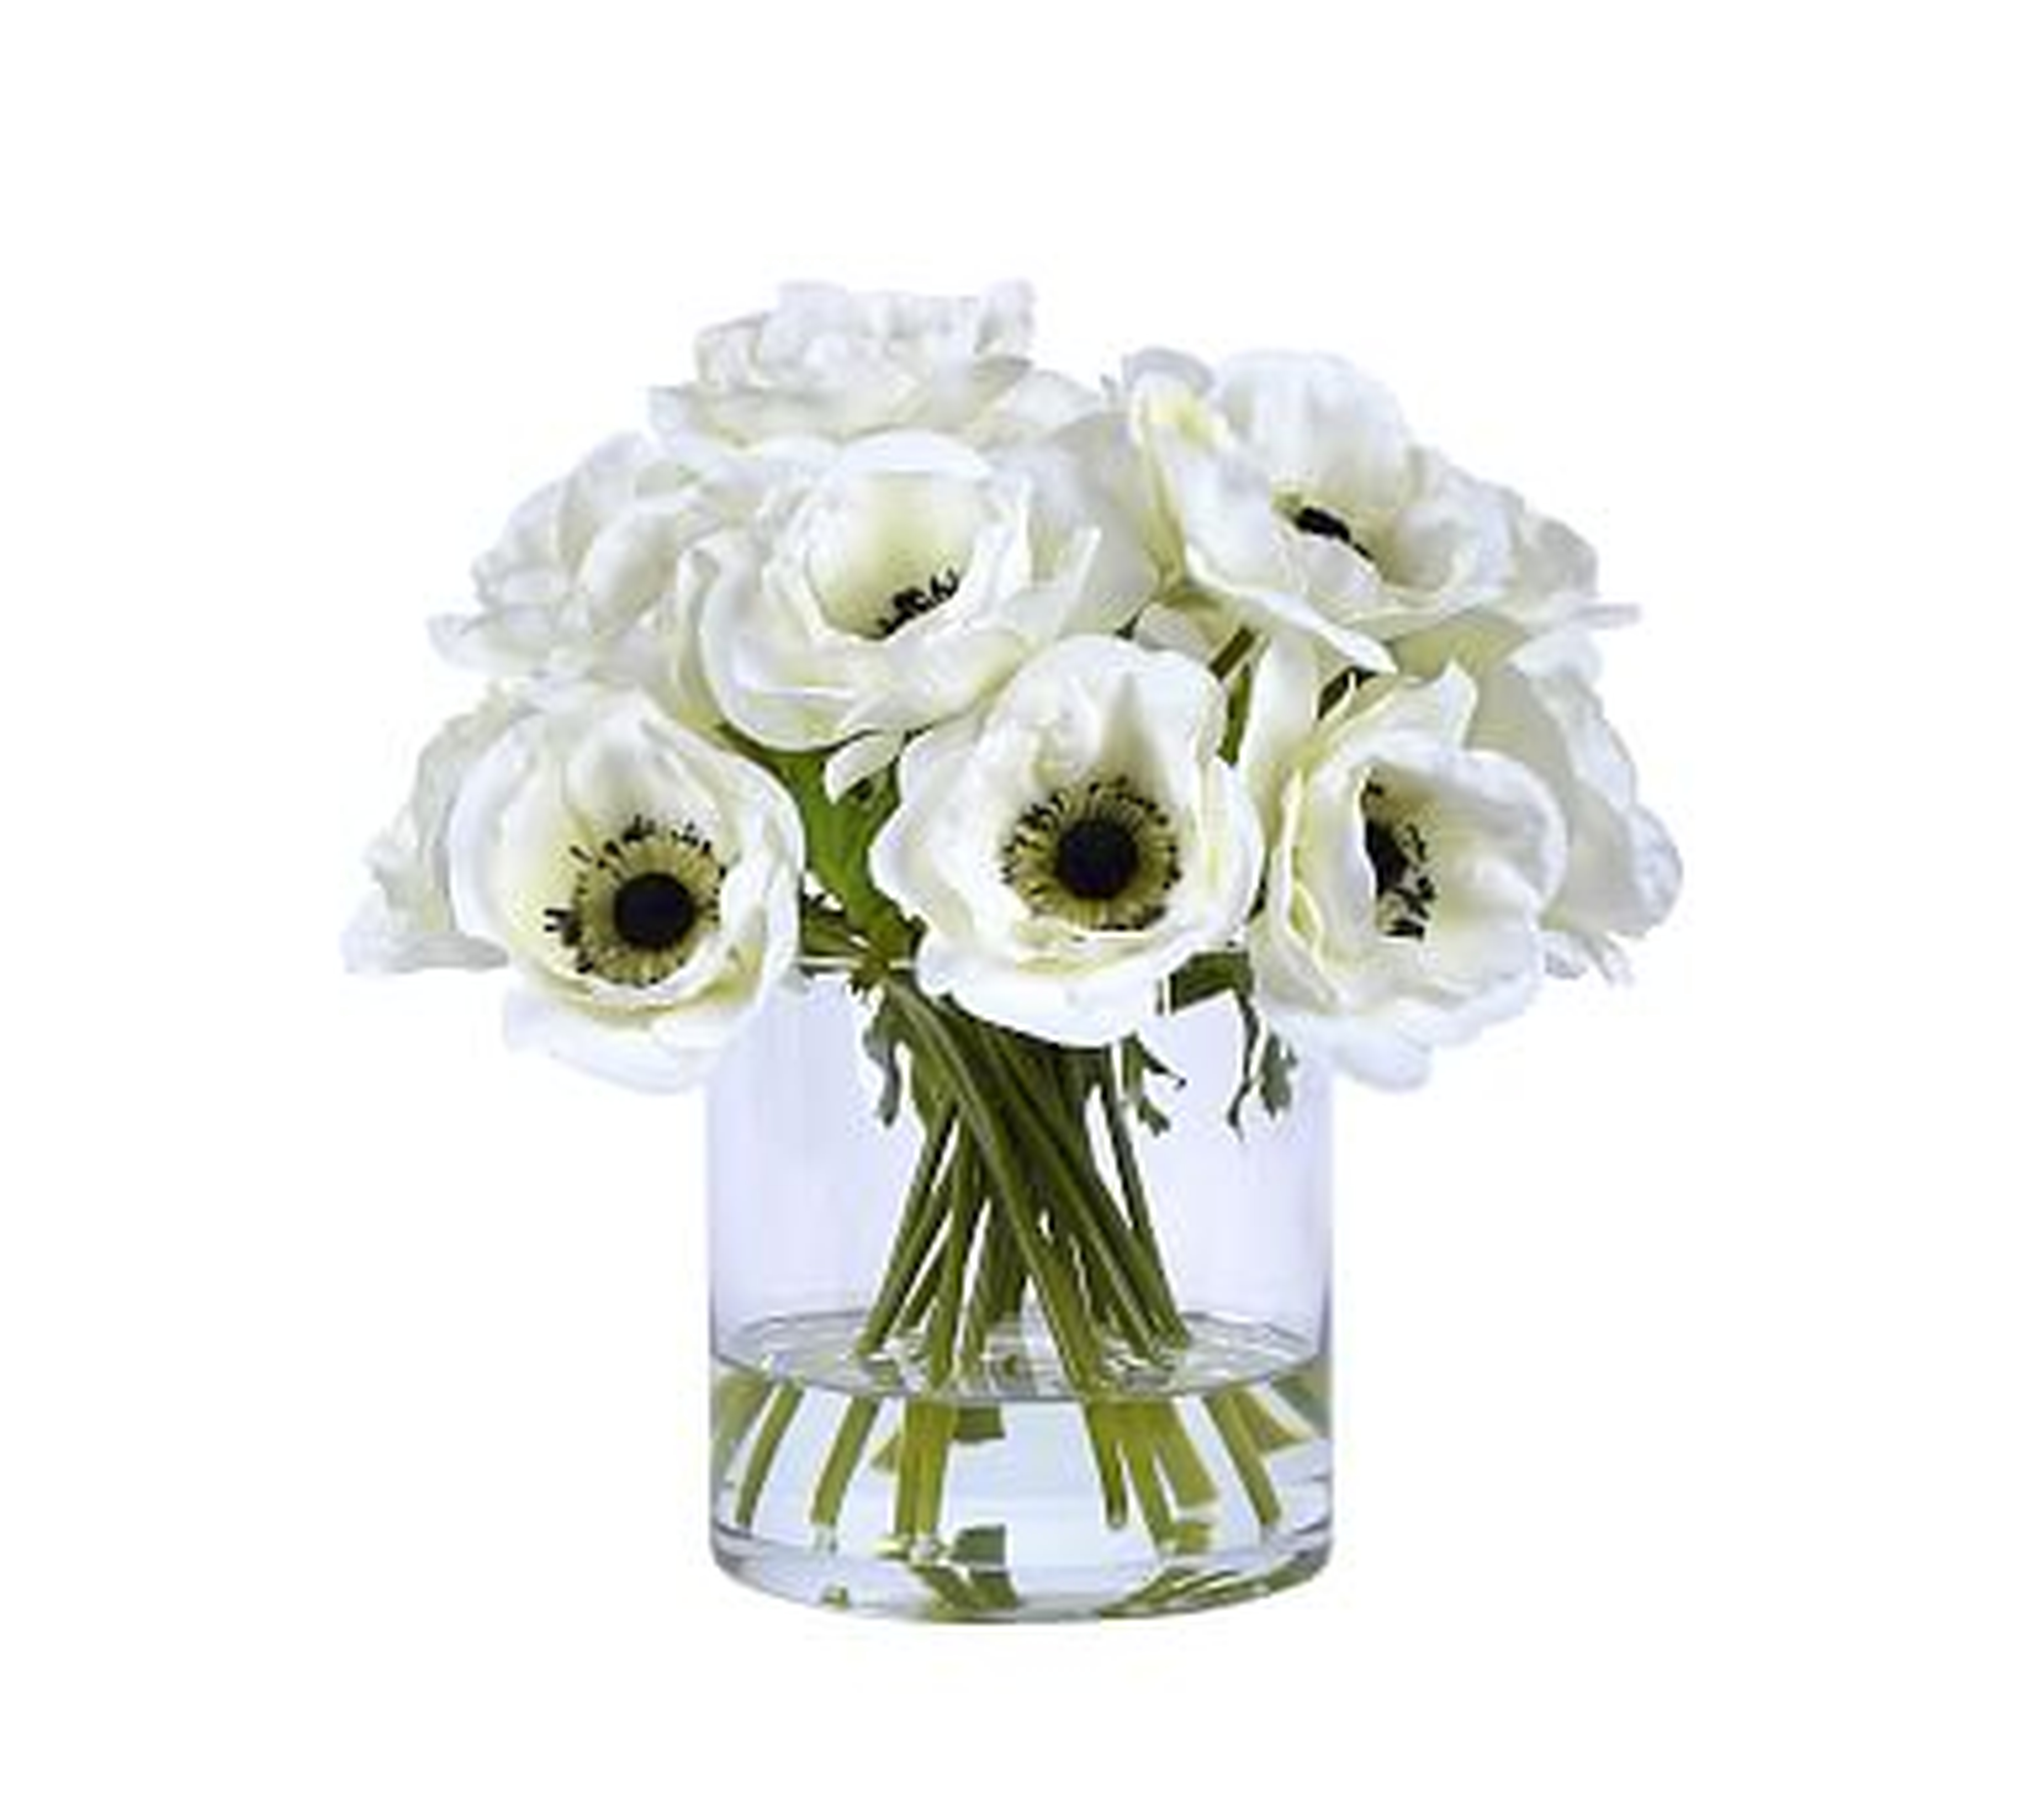 Faux White Poppies In Glass Vase, 12" - Pottery Barn